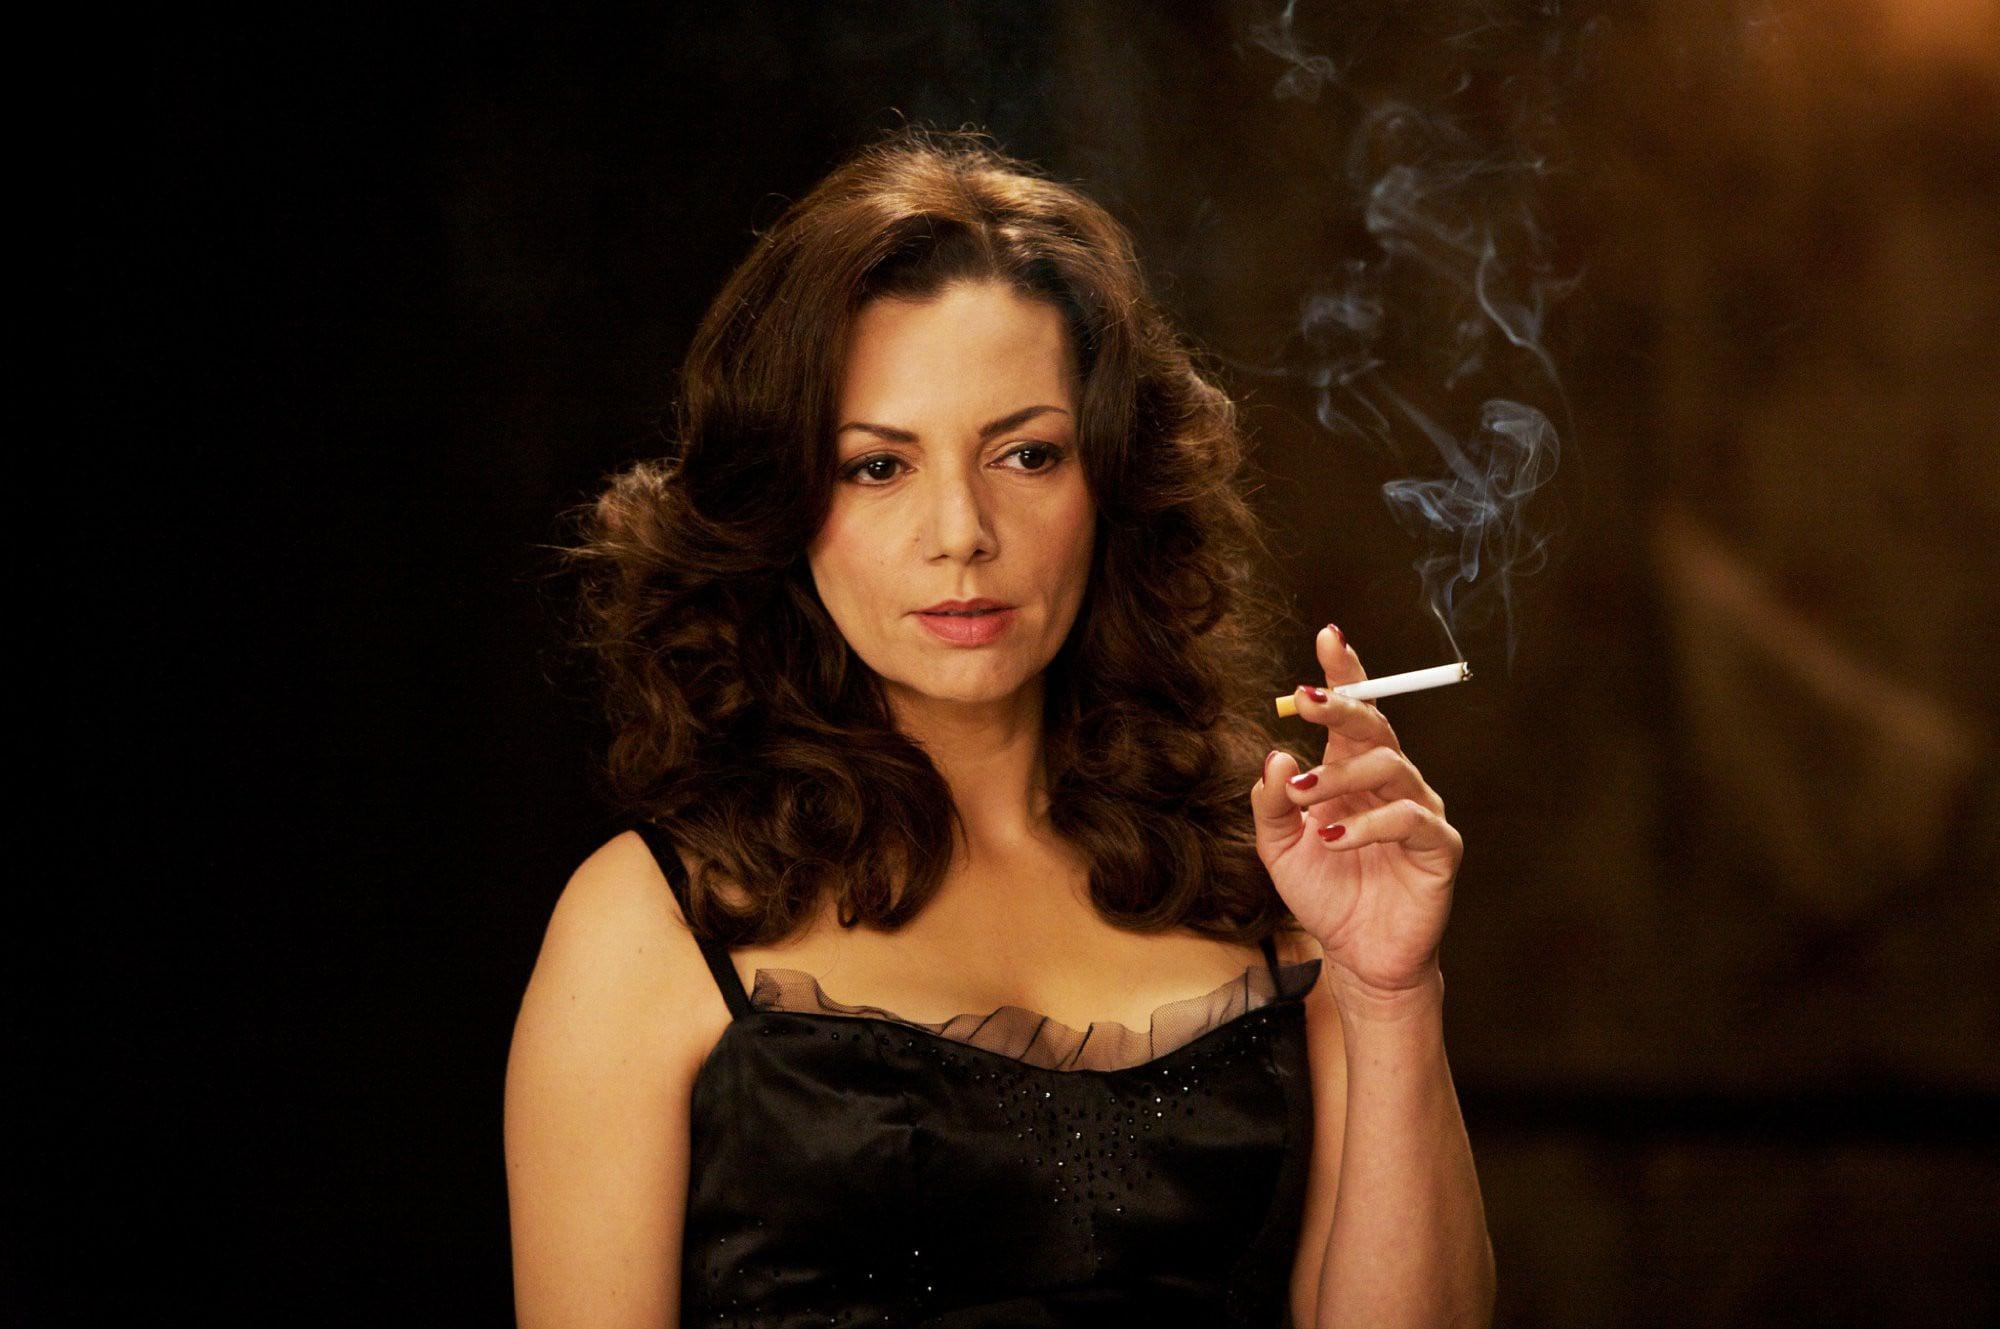 5070453 Celebrity, Joanne Whalley, Brunette, Woman, Actress, Smoking.